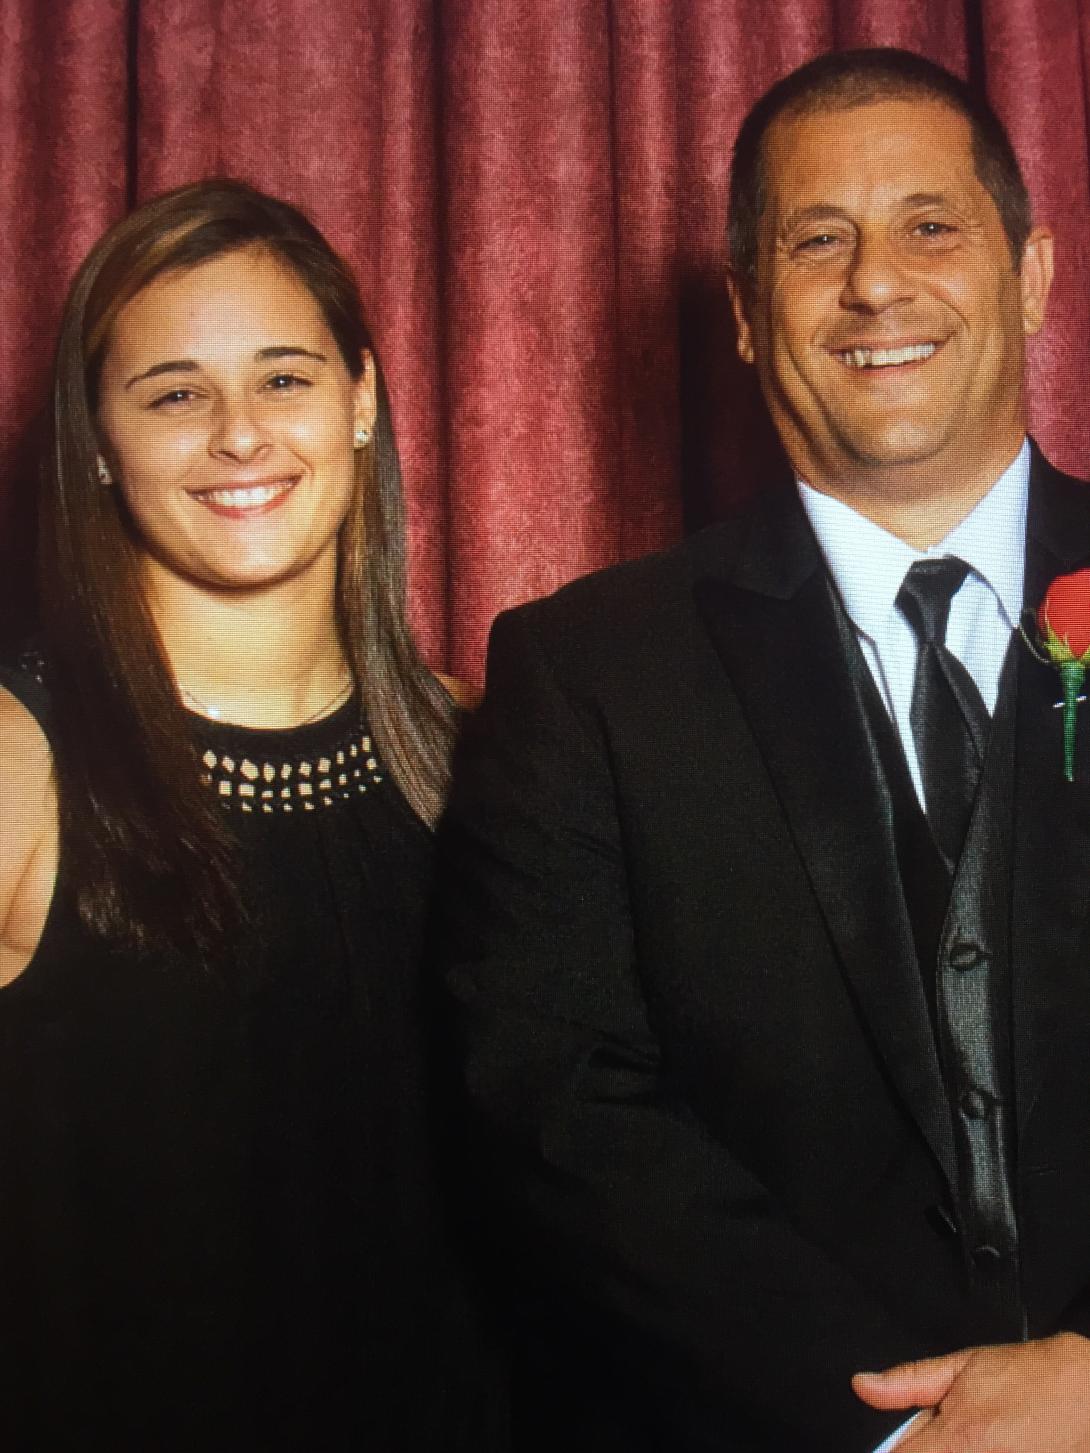 Michael Salomone with his daughter Maggie